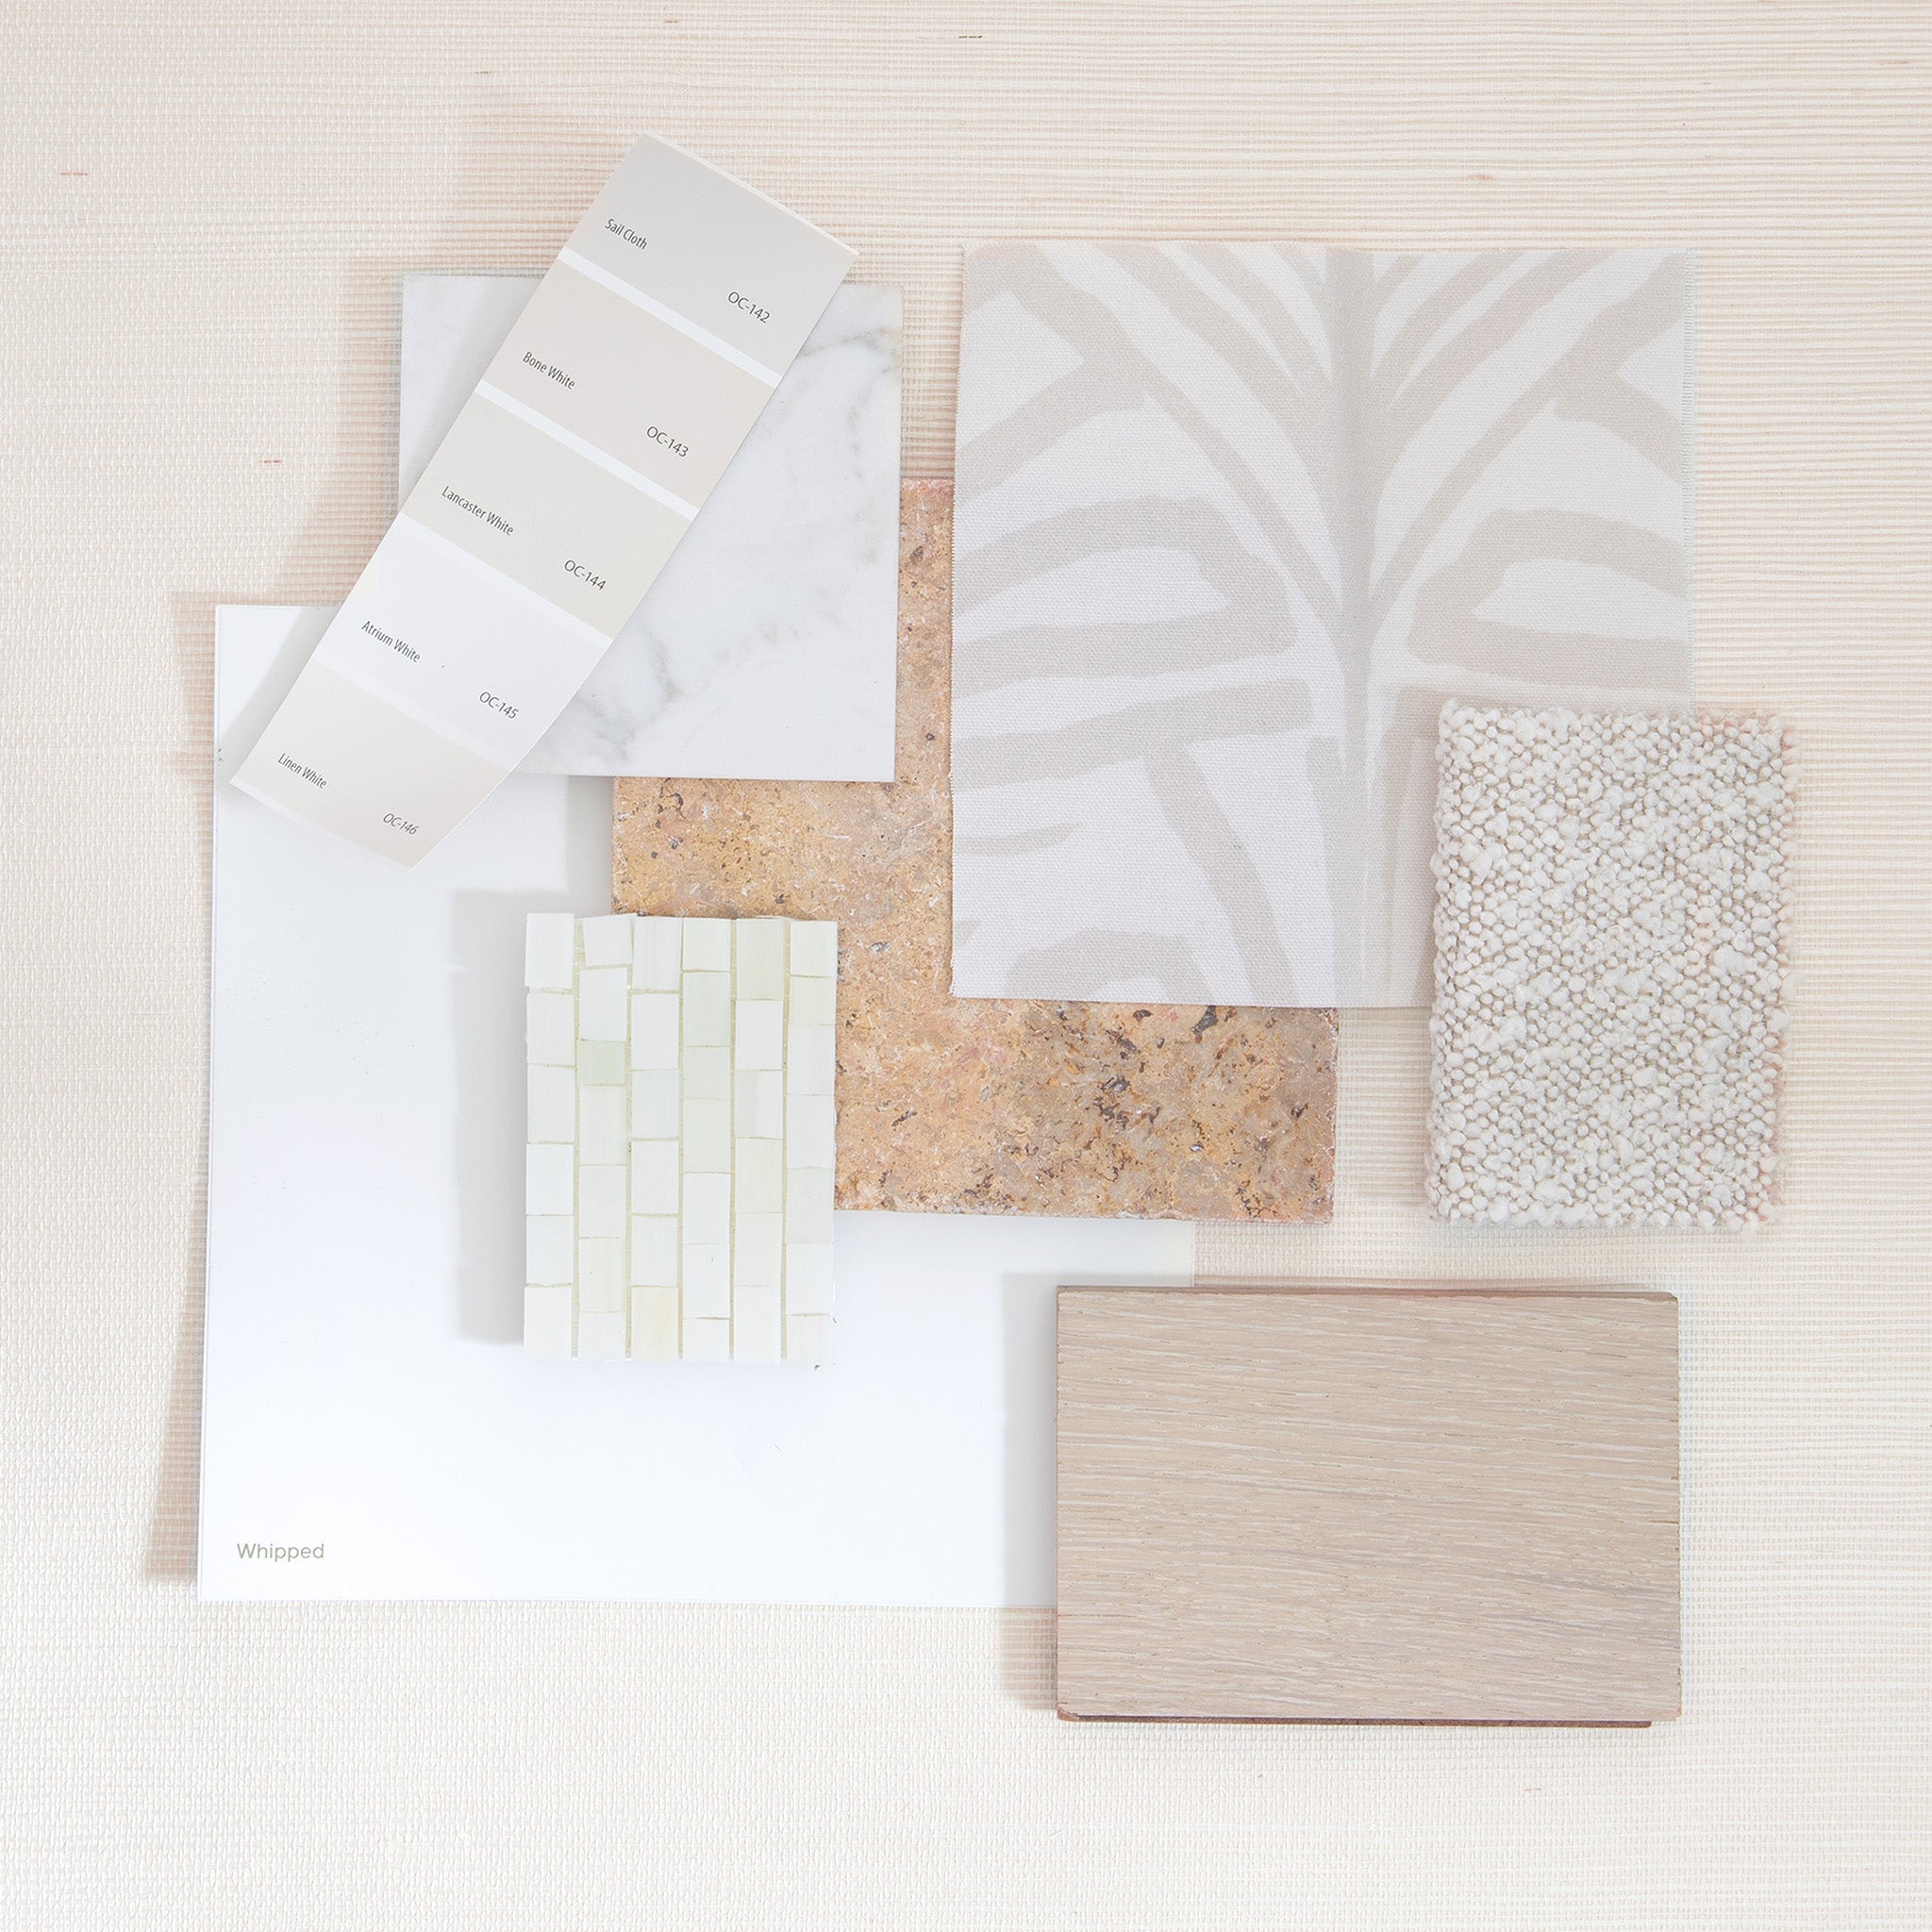 Interior design moodboard and wallpaper inspirations with cream paint and tile on top